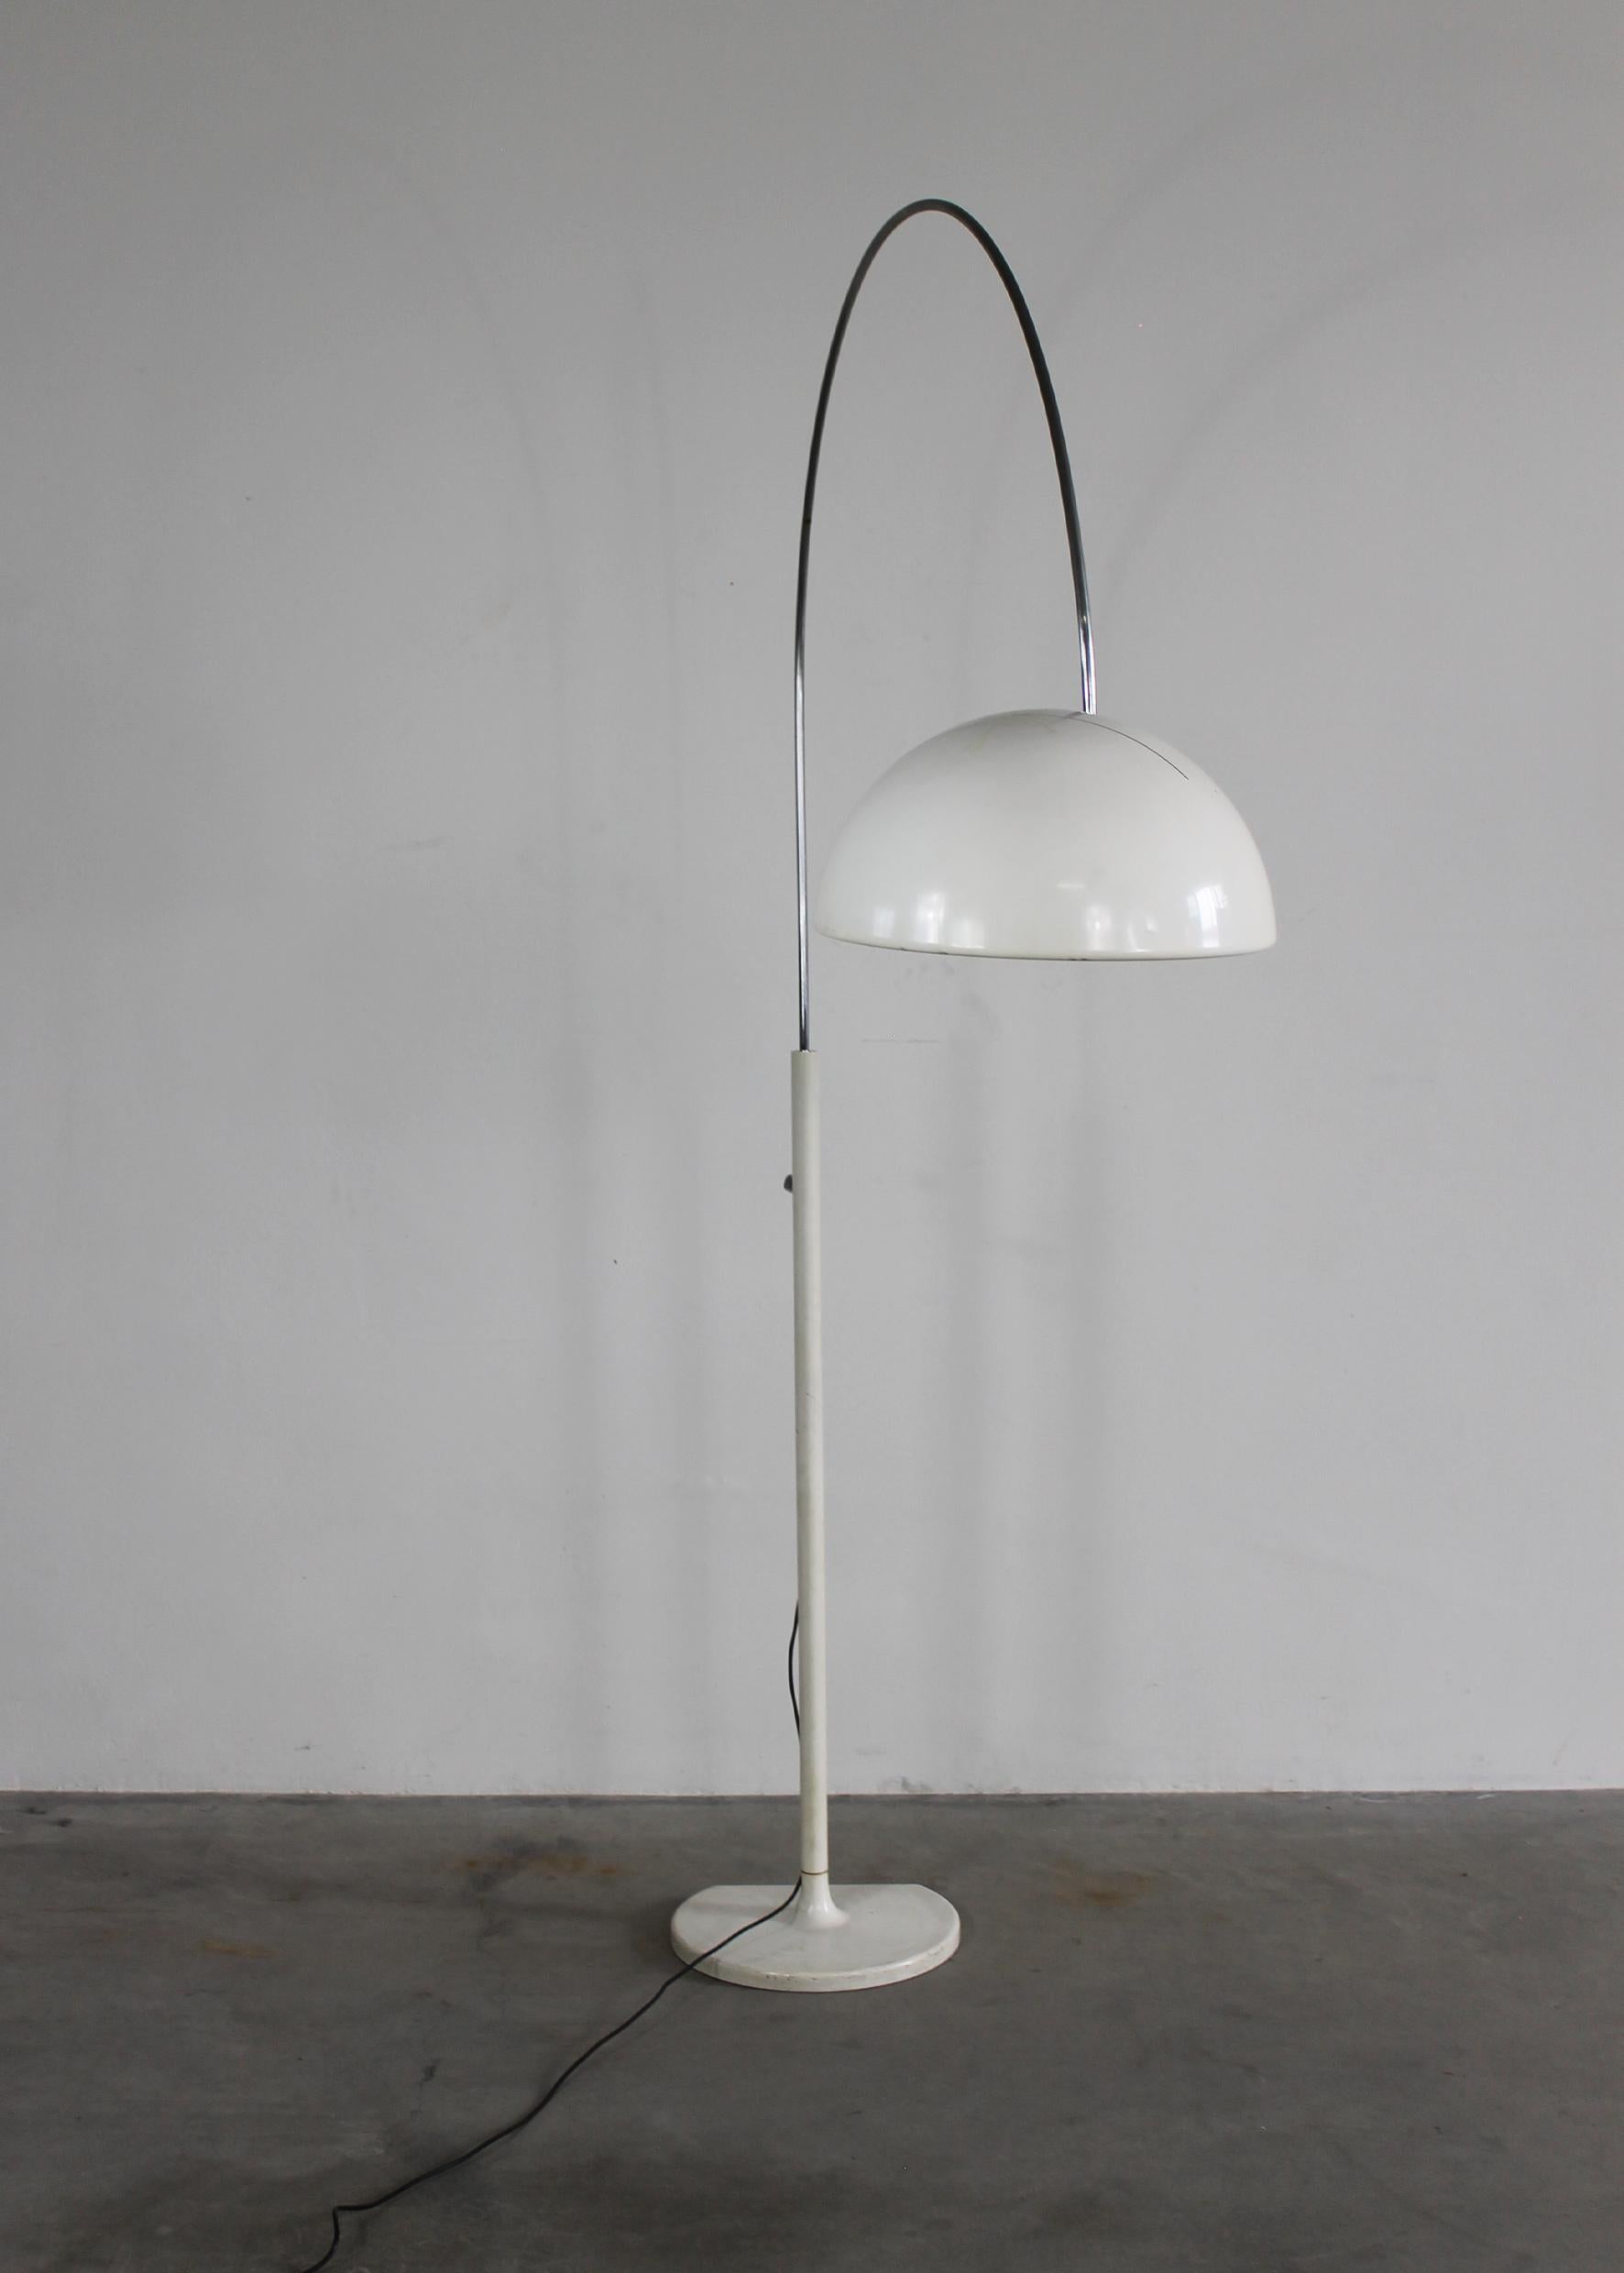 Italian Joe Colombo Coupè Floor Lamp in White Lacquered Metal by Oluce 1967 Italy